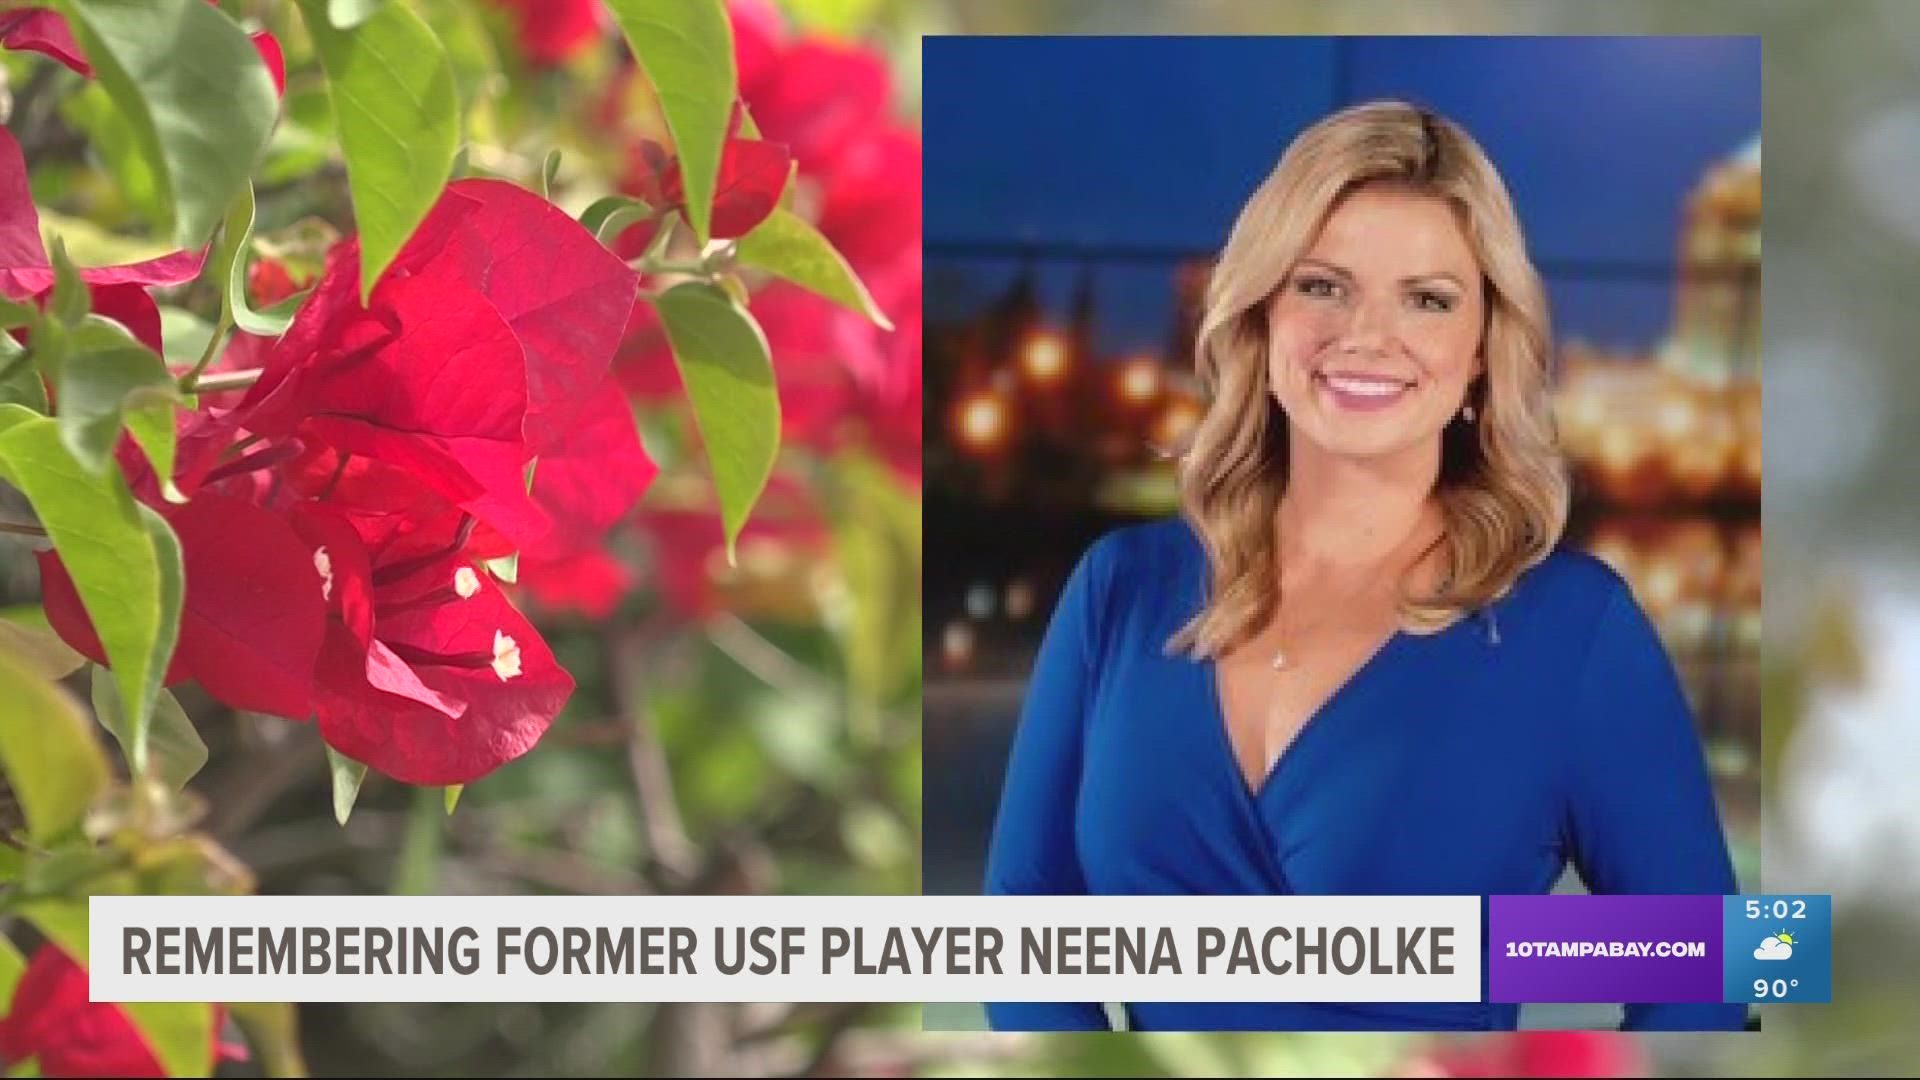 Neena Pacholke died over the weekend in Wisconsin, her news station reported. Friends and family are remembering her for her smile and kindness.